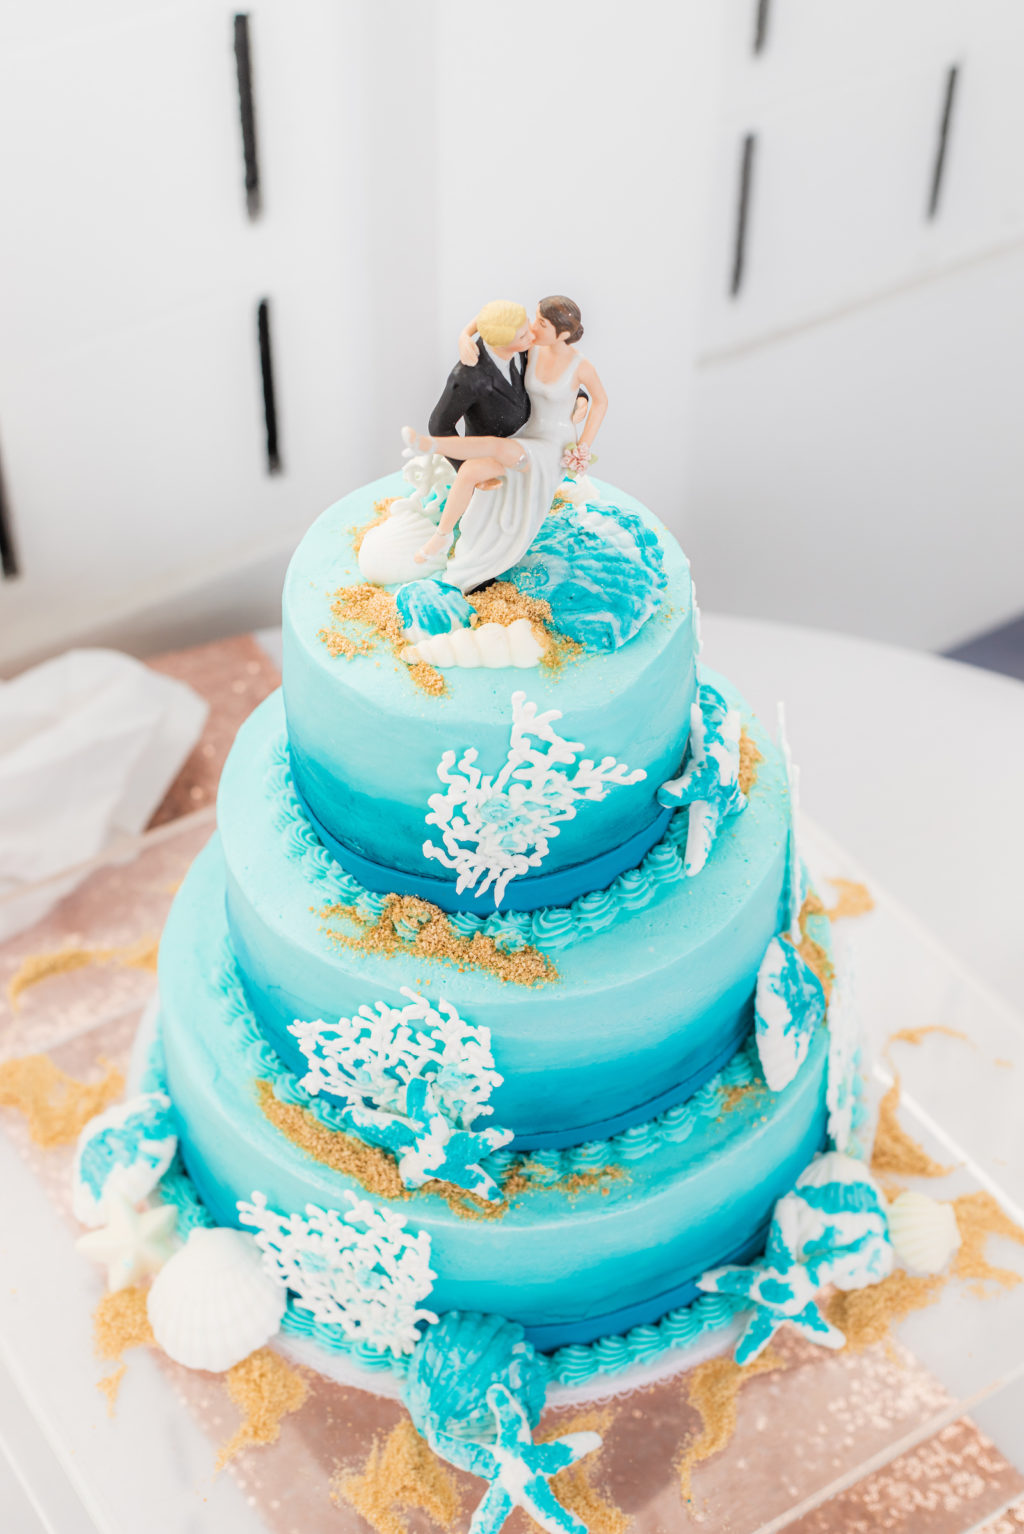 Tropical Ocean Theme Blue Three Tier Wedding Cake with Fondant Seashells and Coral, Bride and Groom Figurine Cake Toppers